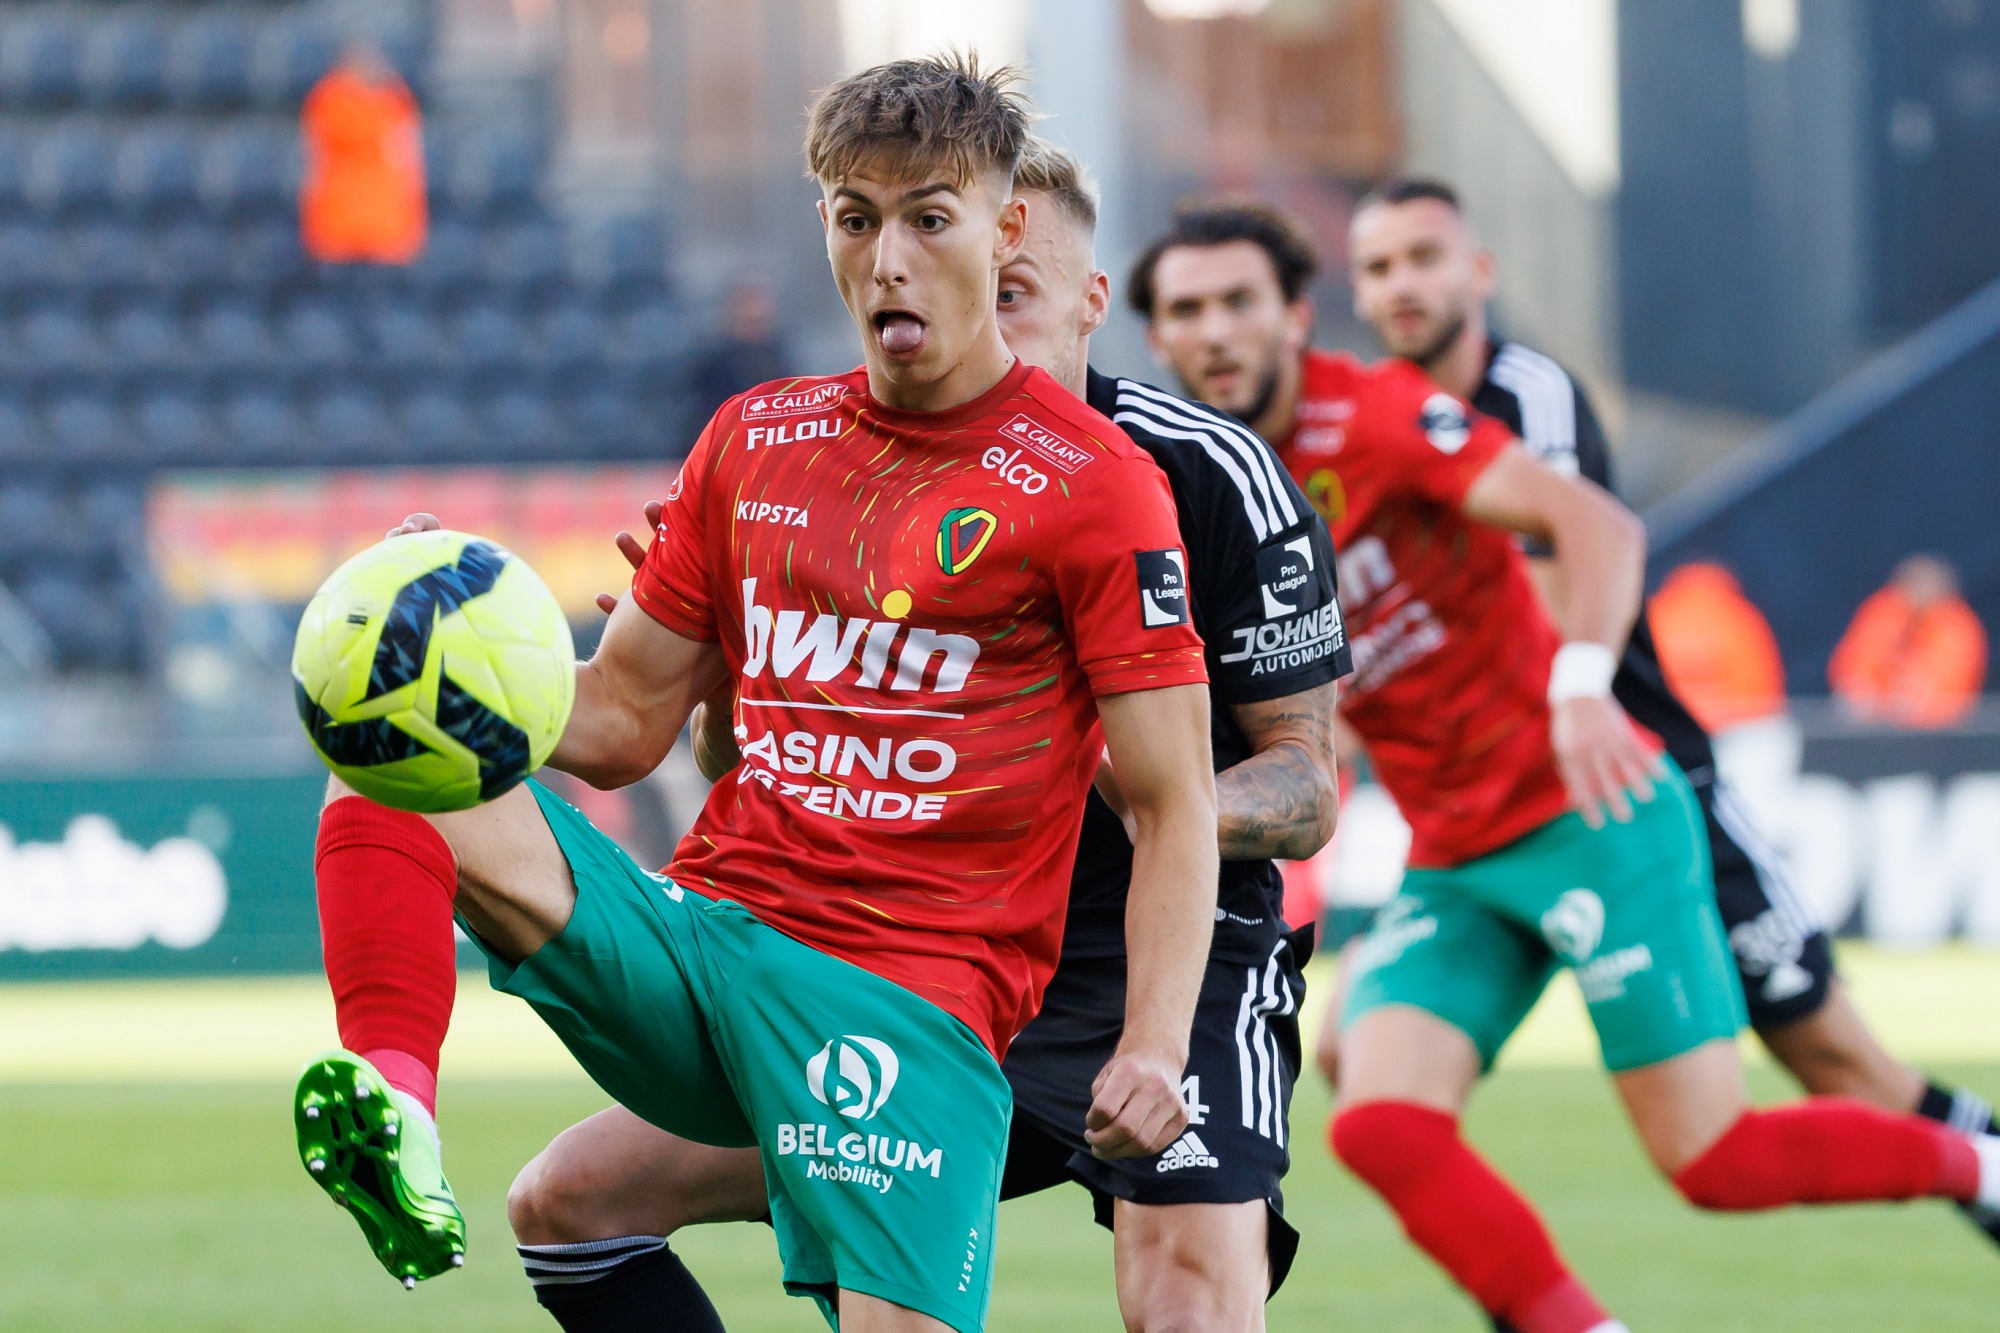 Oostende's Nick Batzner pictured in action during a soccer match between KV Oostende and KAS Eupen, Saturday 10 September 2022 in Oostende, on day 8 of the 2022-2023 'Jupiler Pro League' first division of the Belgian championship. BELGA PHOTO KURT DESPLENTER